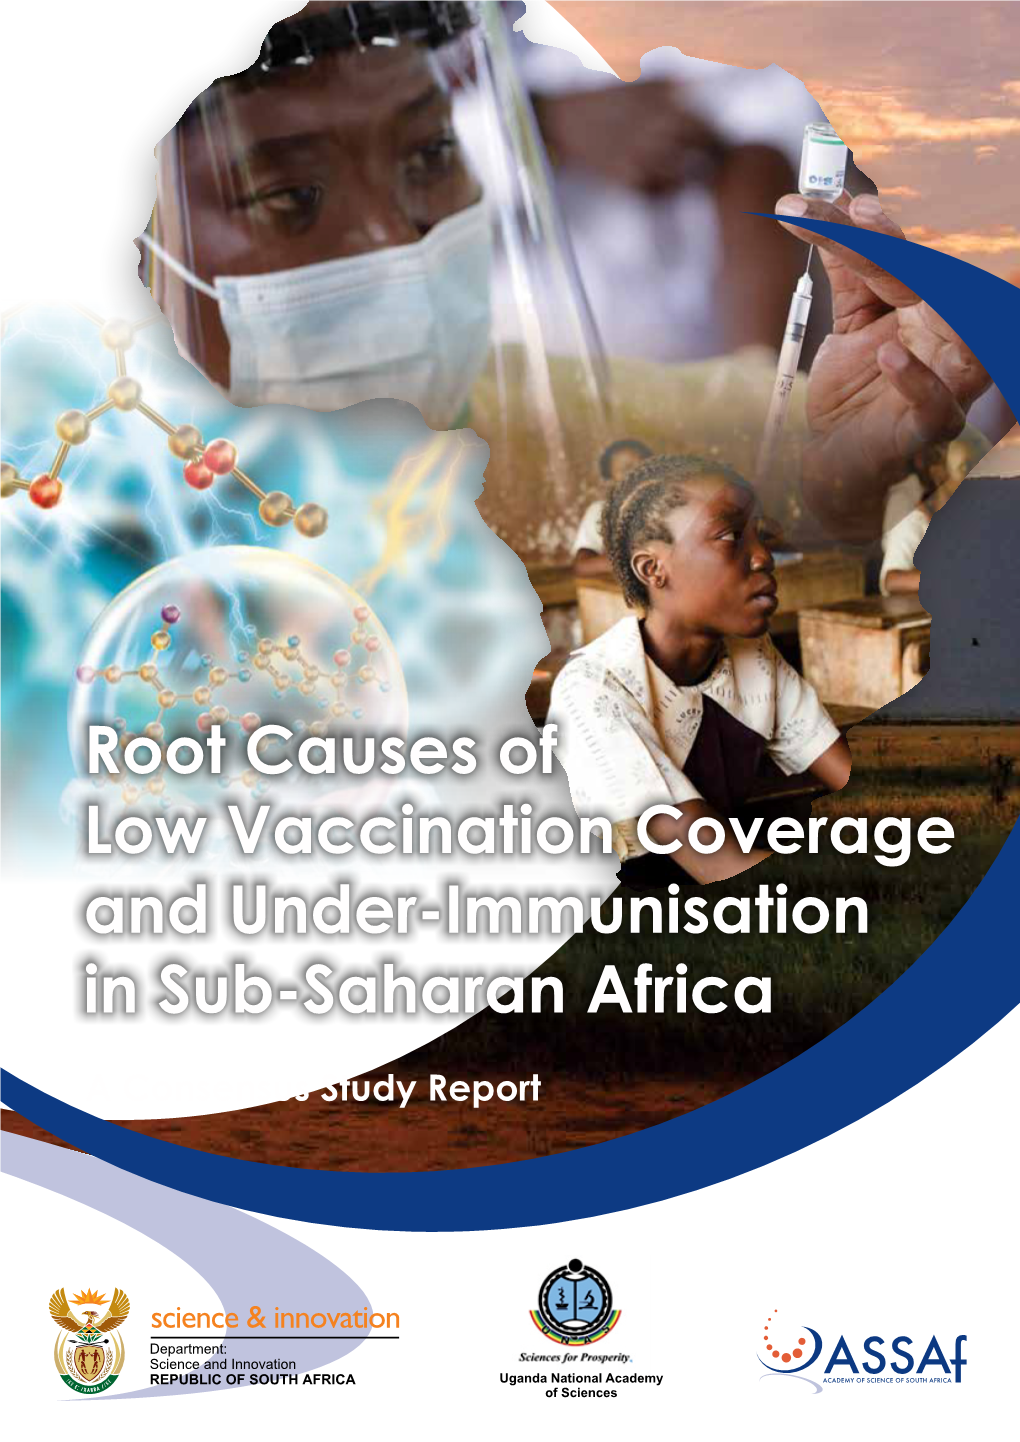 Root Causes of Low Vaccination Coverage and Under-Immunisation in Sub-Saharan Africa